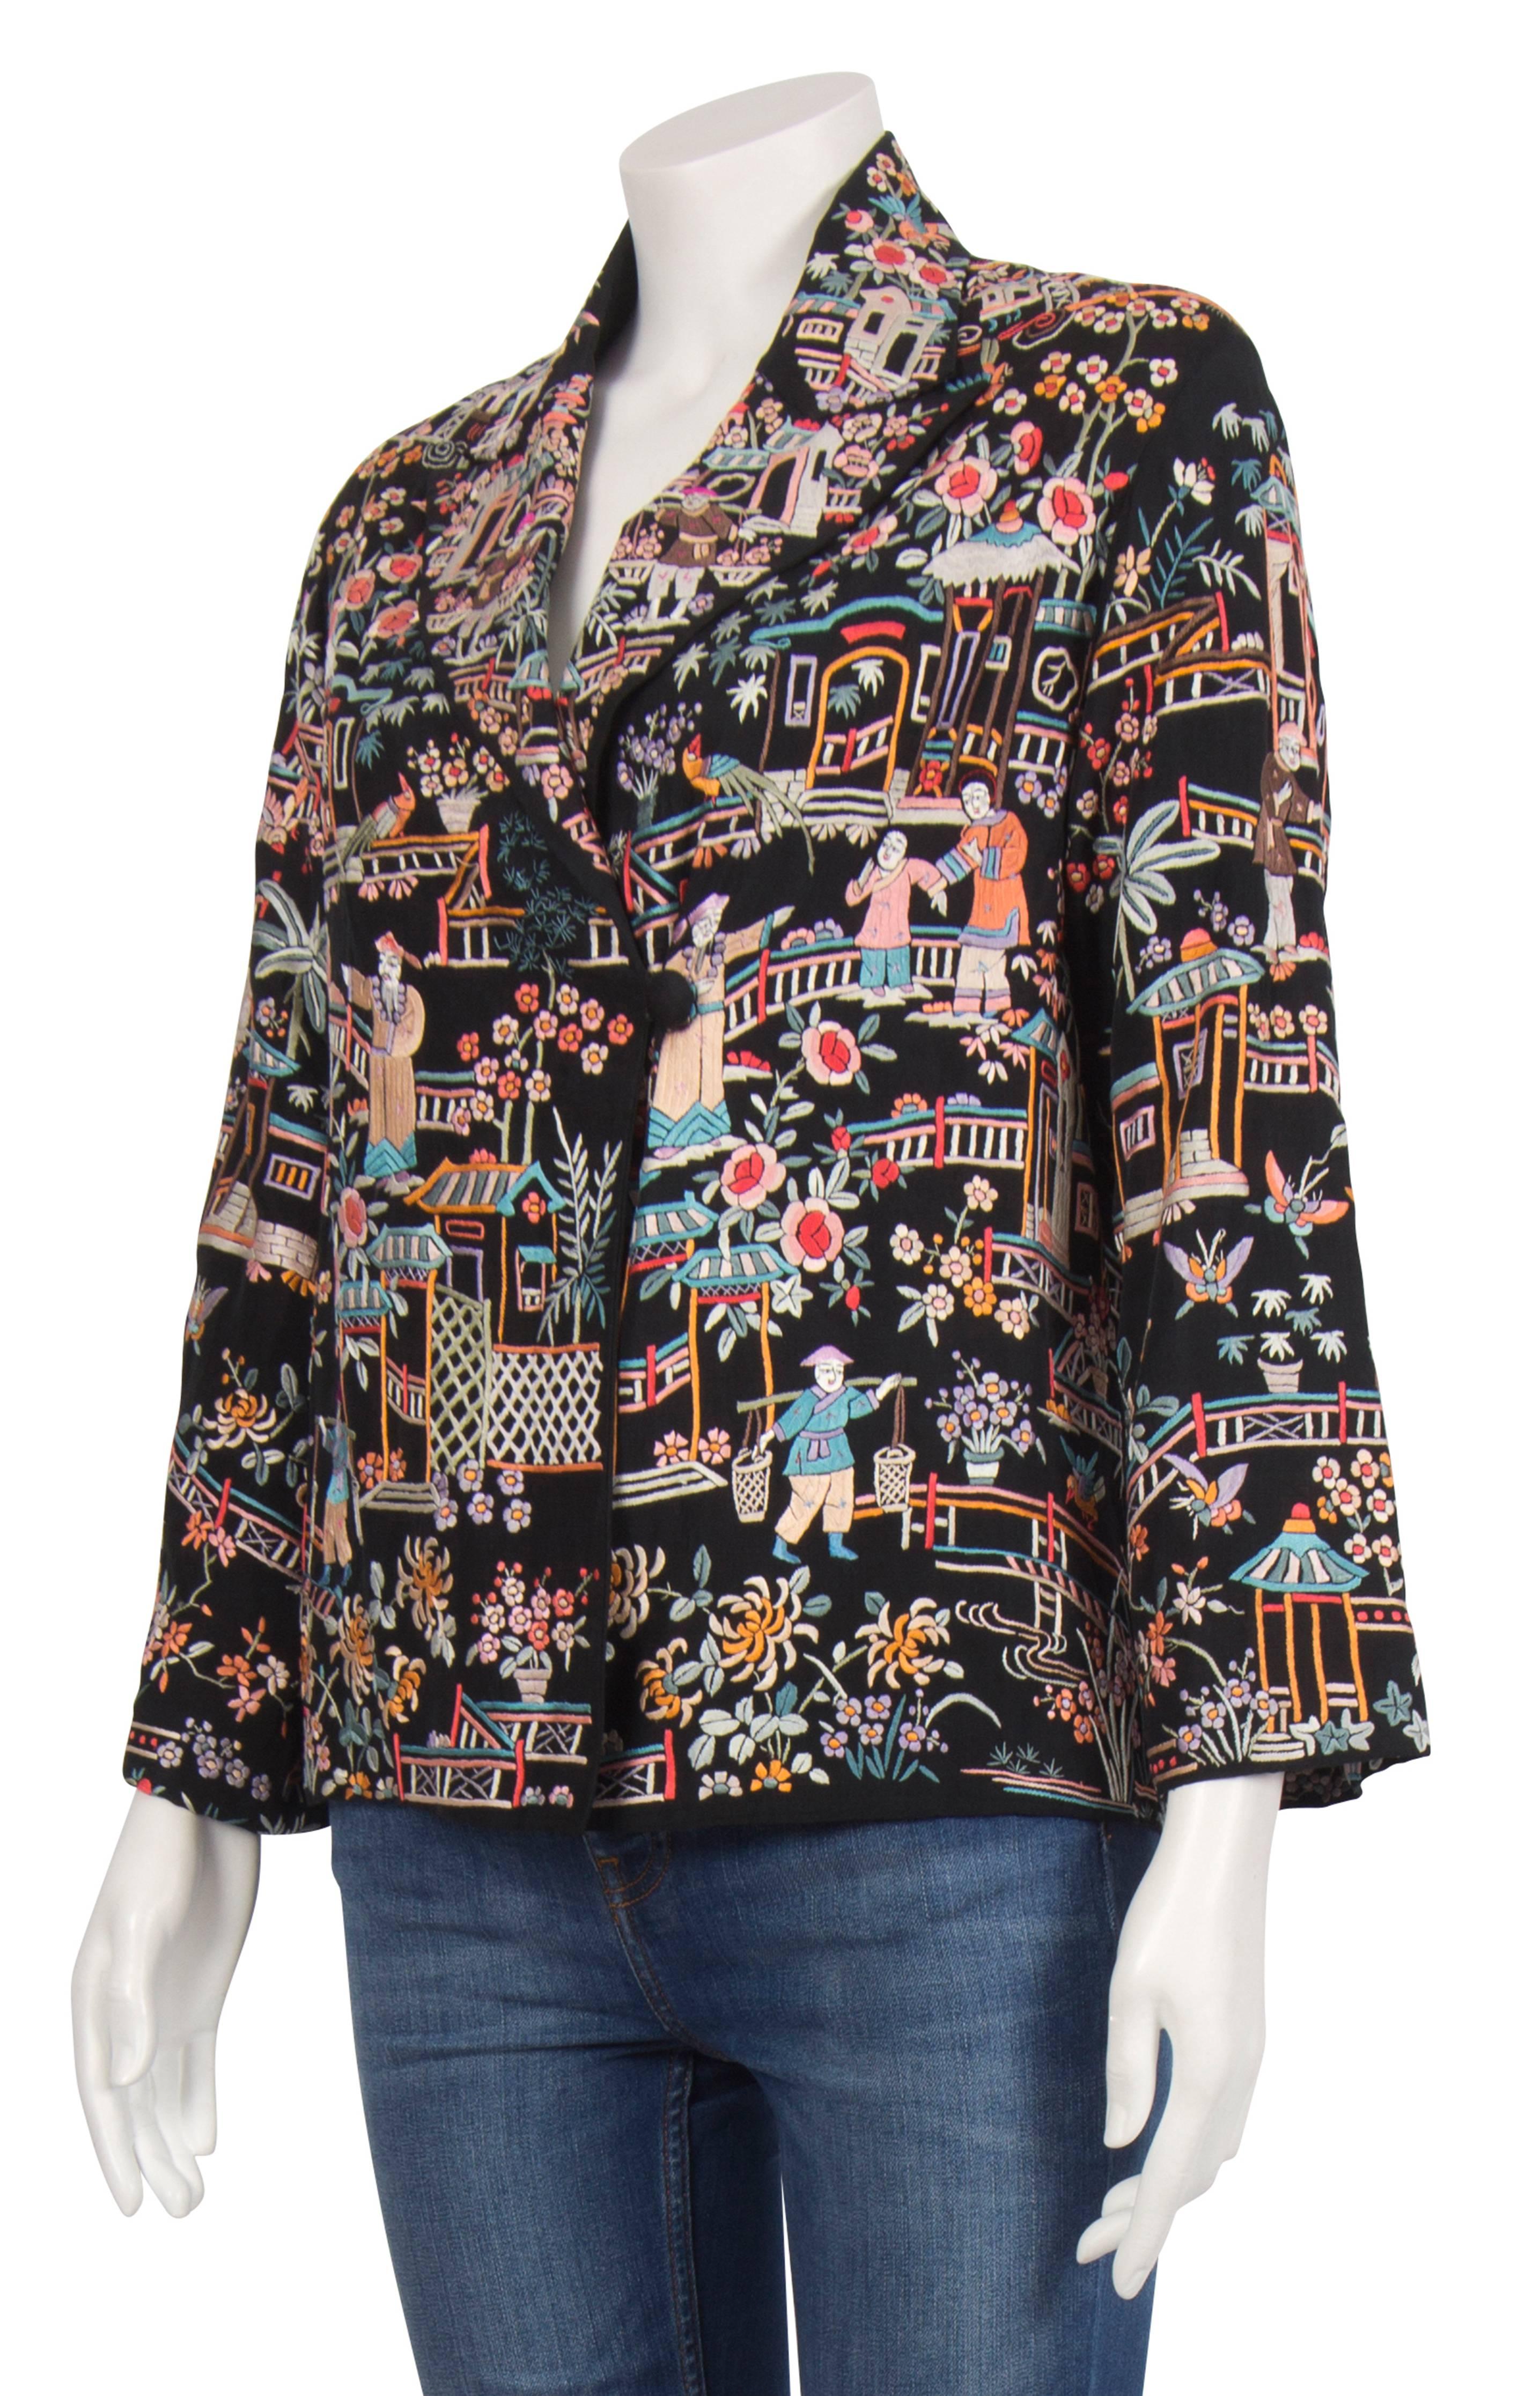 A 1940's black jacket with colourful Chinese garden scene embroidery in pastel colour silk thread. The jacket has a boxy fit and it's made from and lined with pure silk, making it extremely soft and lightweight. It has a double breasted fastening